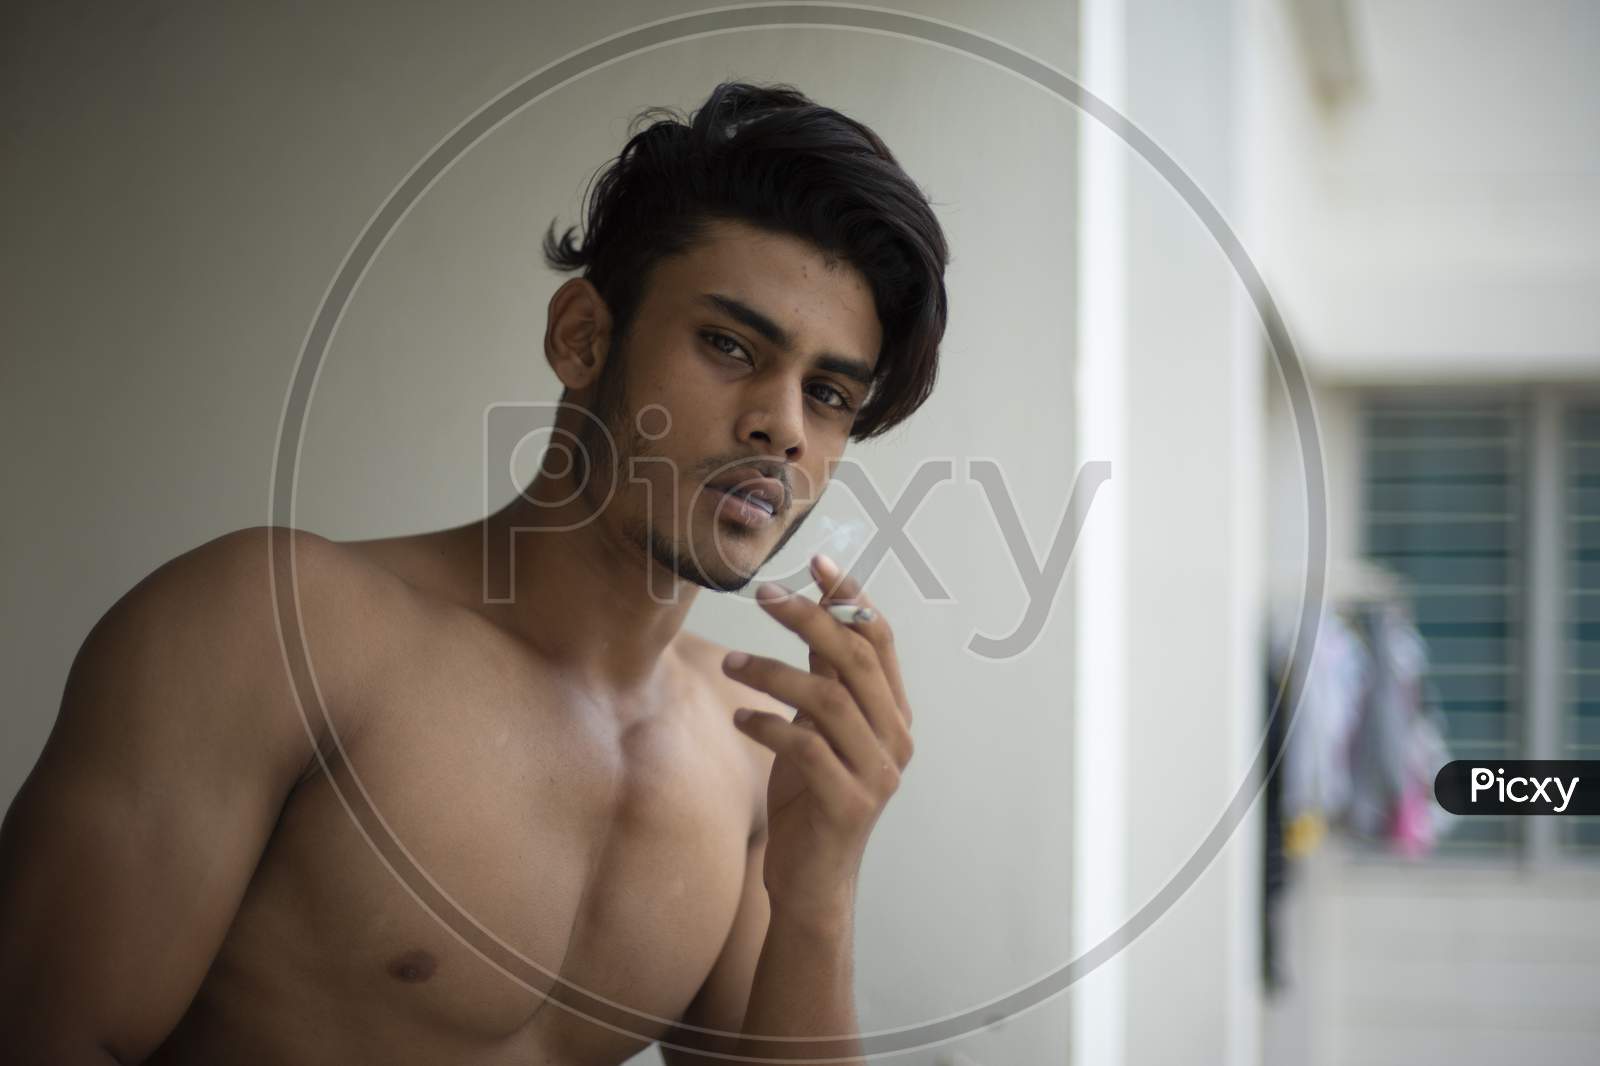 Portrait of an young and handsome brunette Bengali muscular man in bare body smoking on a balcony in white urban background. Indian lifestyle.